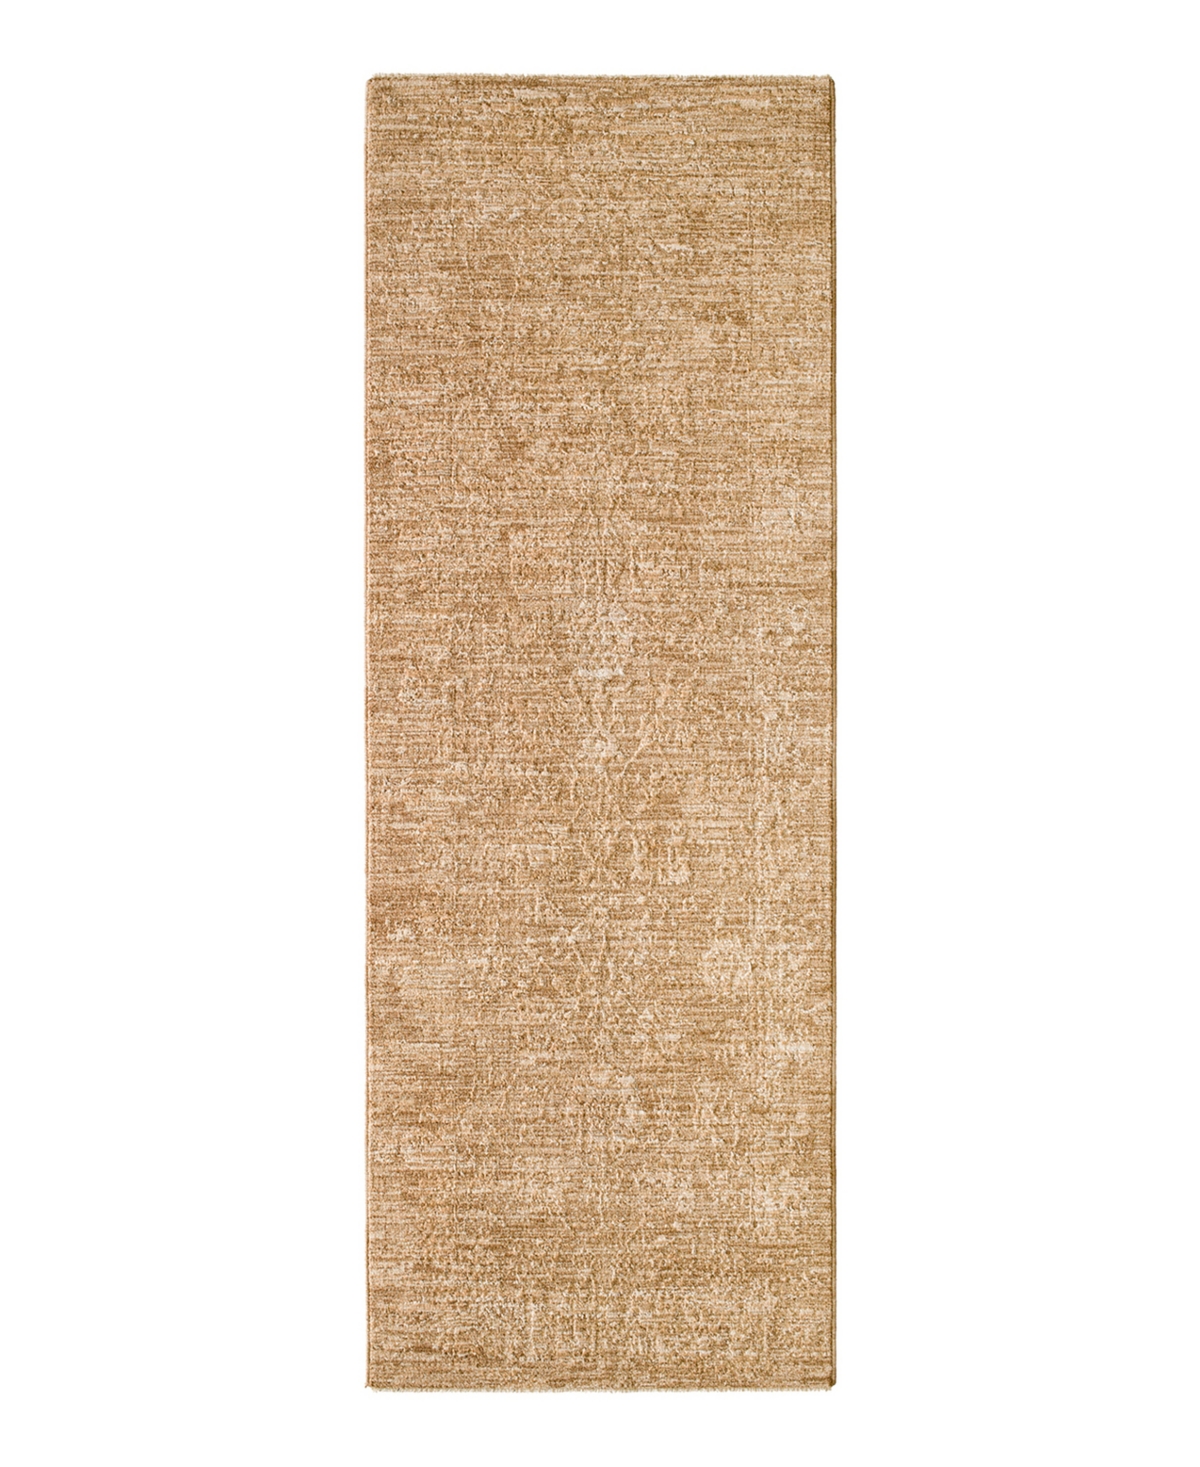 Surya Masterpiece High-low Mpc-2300 2'8" X 10' Runner Area Rug In Tan